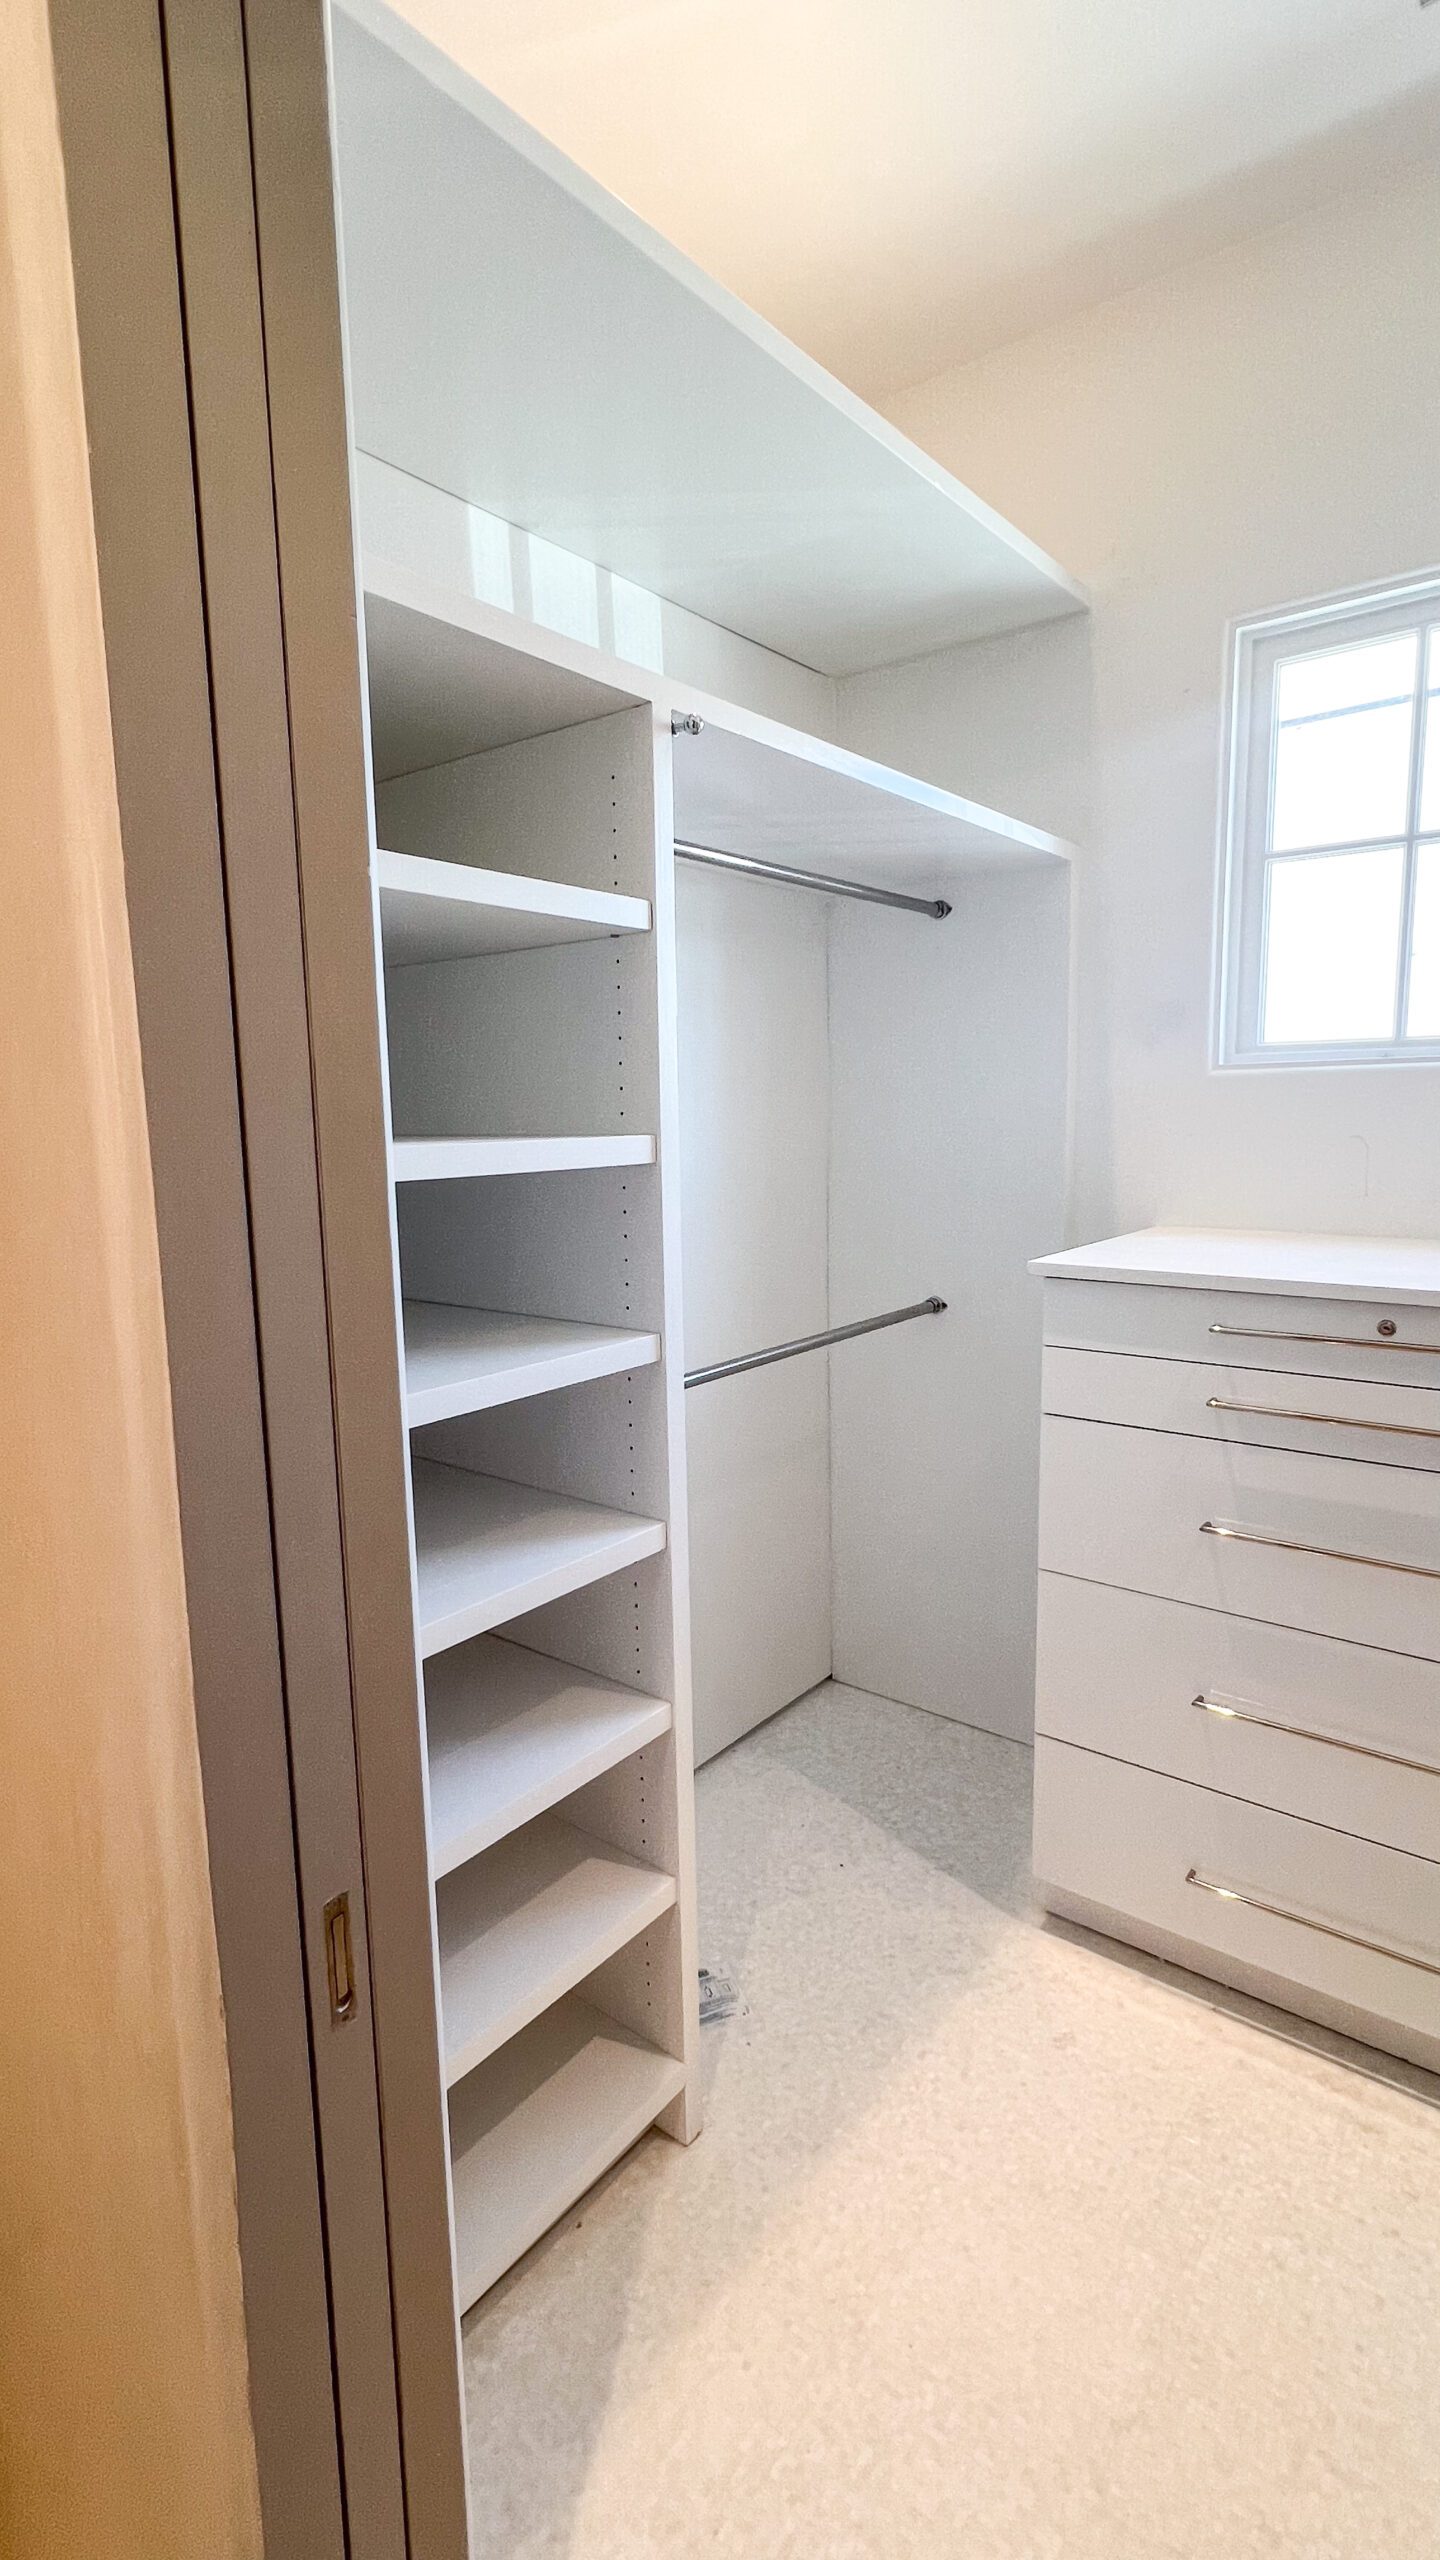 A custom closet means you have the perfect amount of space for the items you plan on storing. Checkout this closet installation we just completed! ⁠